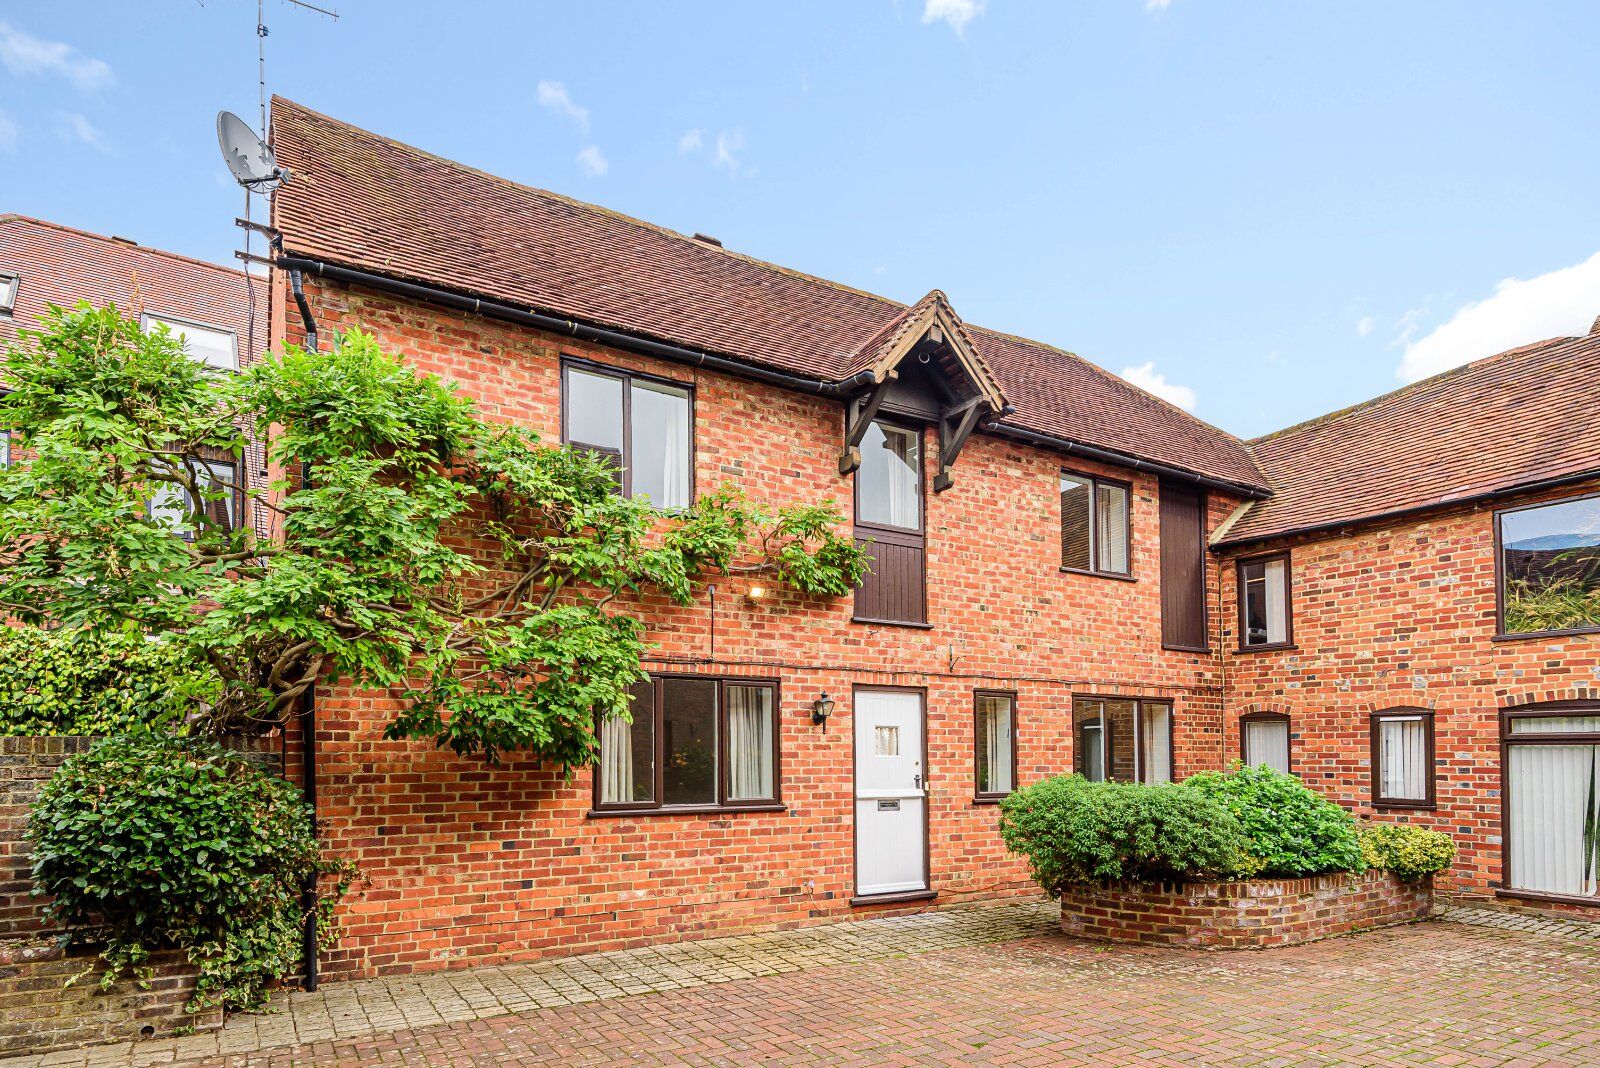 3 bedroom semi detached house for sale Adam Court, Henley-On-Thames, RG9, main image